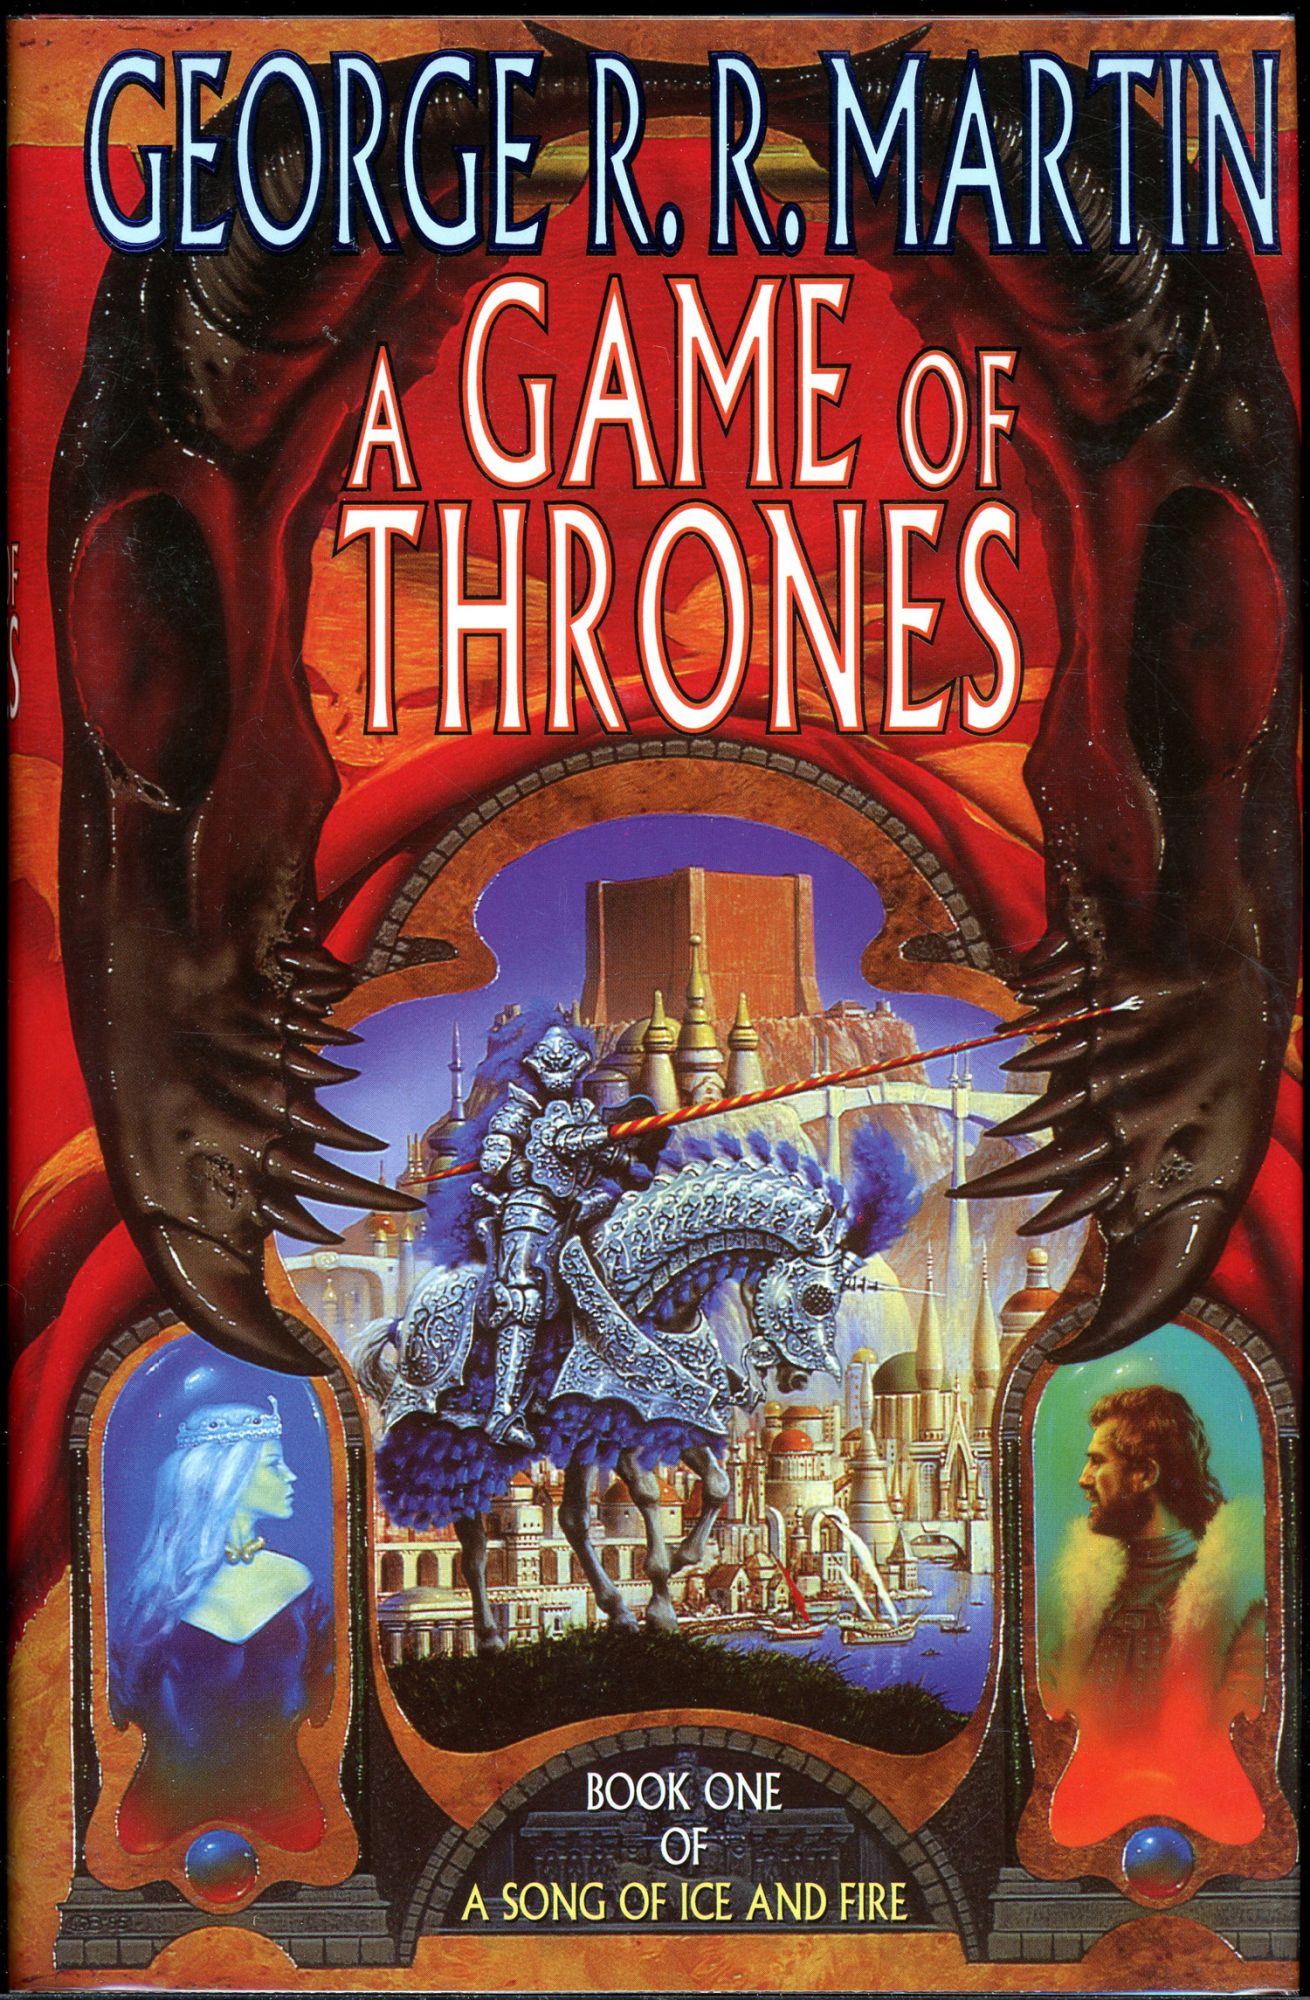 A Game of Thrones / A Clash of Kings by George R.R. Martin